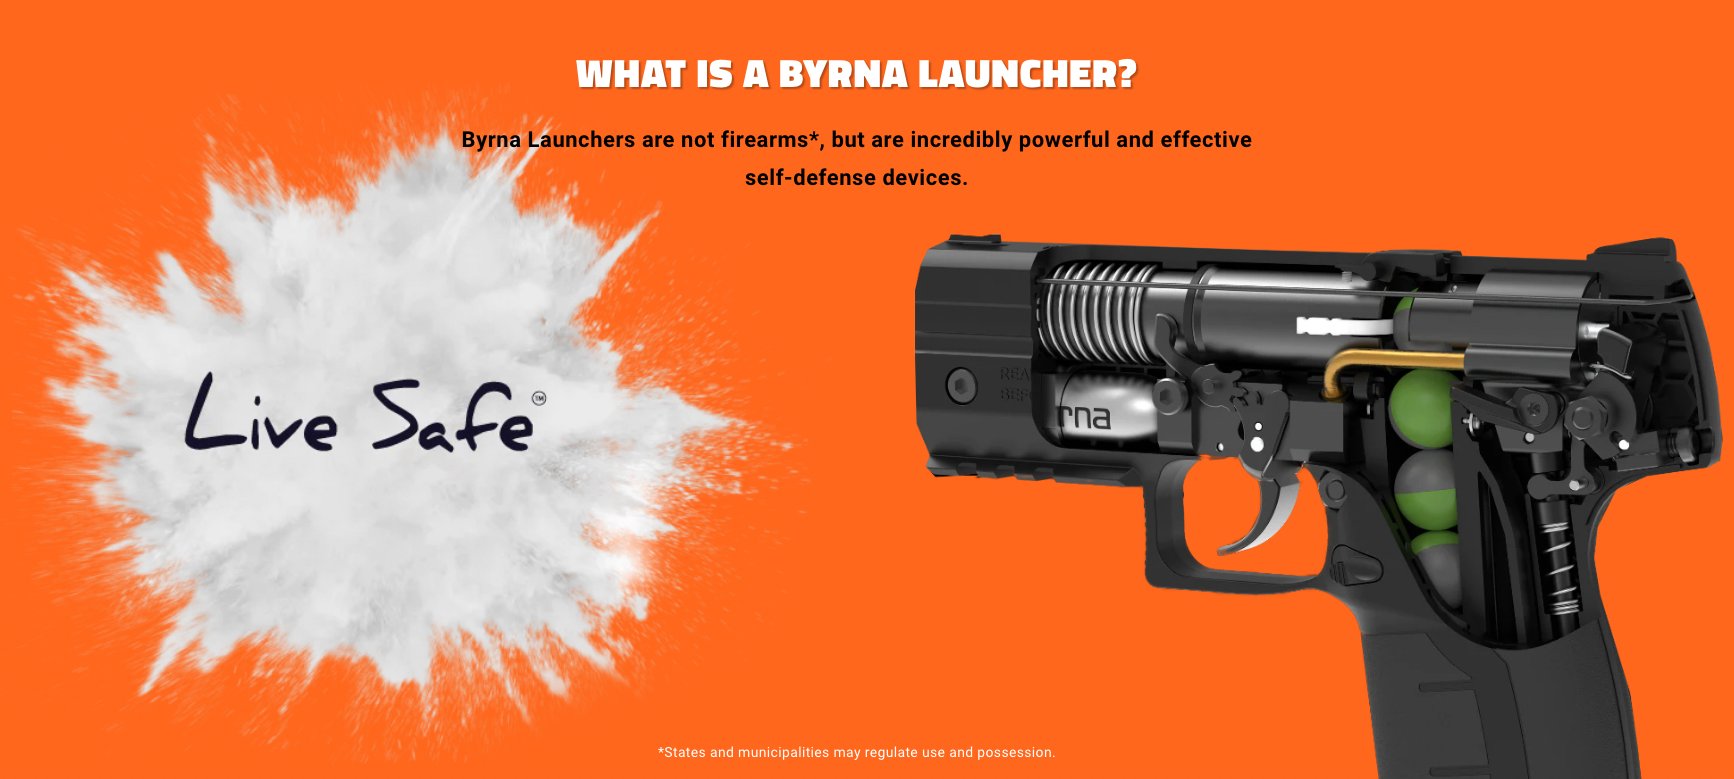 Load video: Byrna Launchers are not firearms*, but are incredibly powerful and effective self-defense devices.